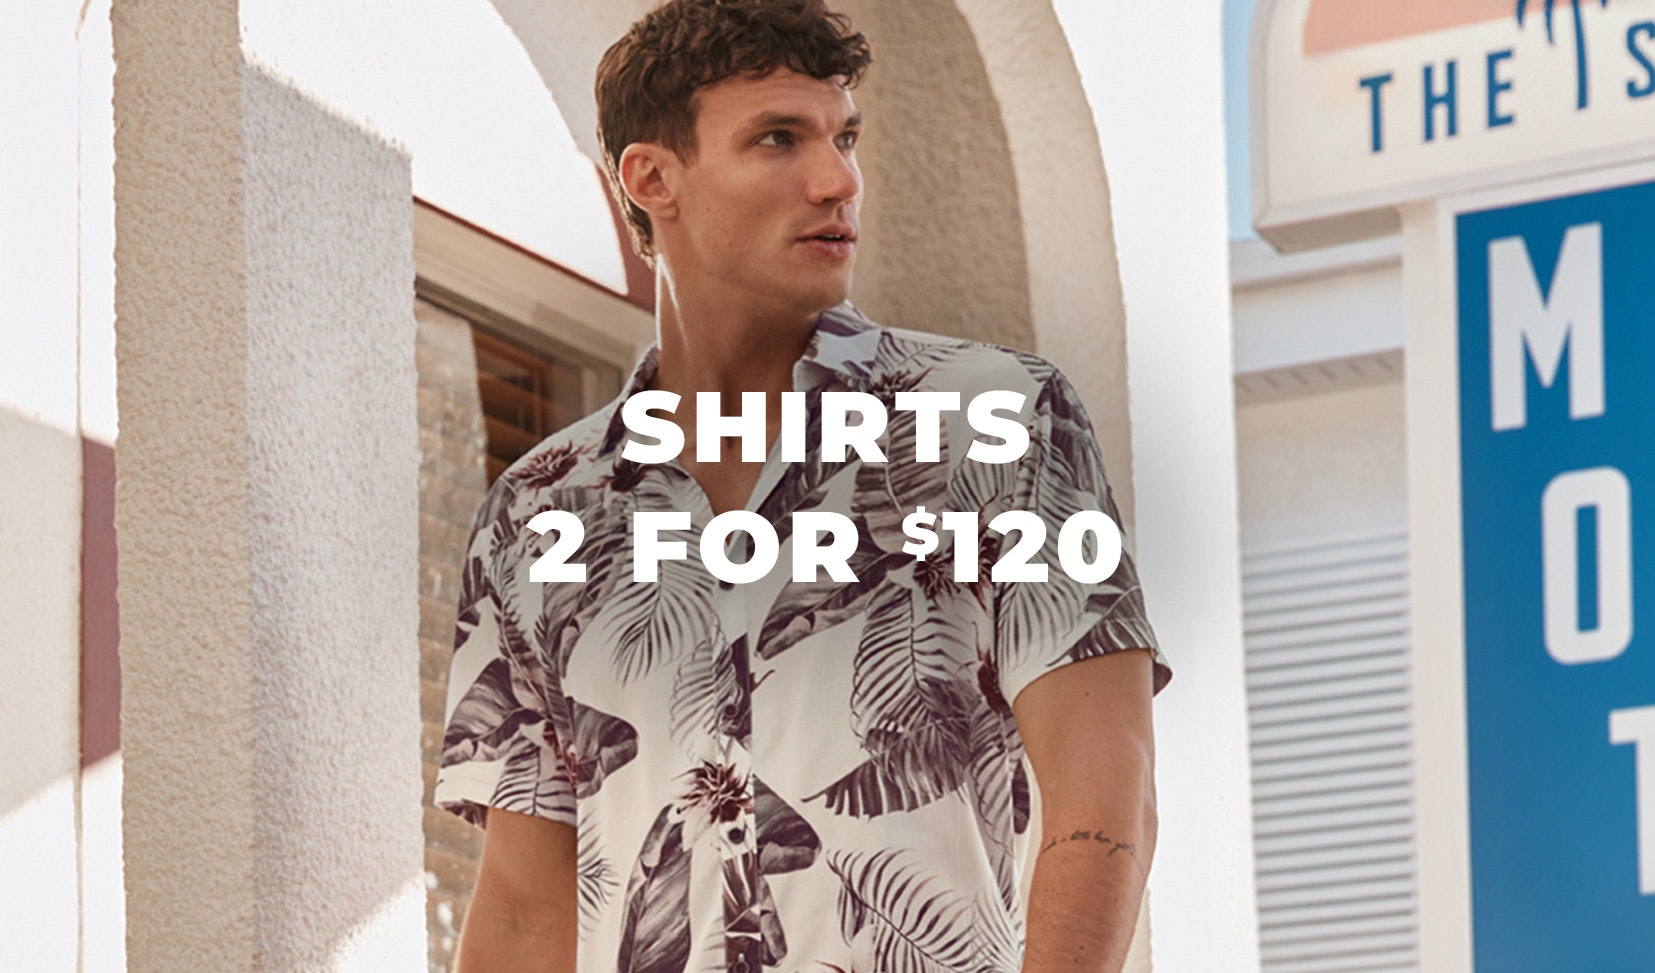 2 for 120 shirts